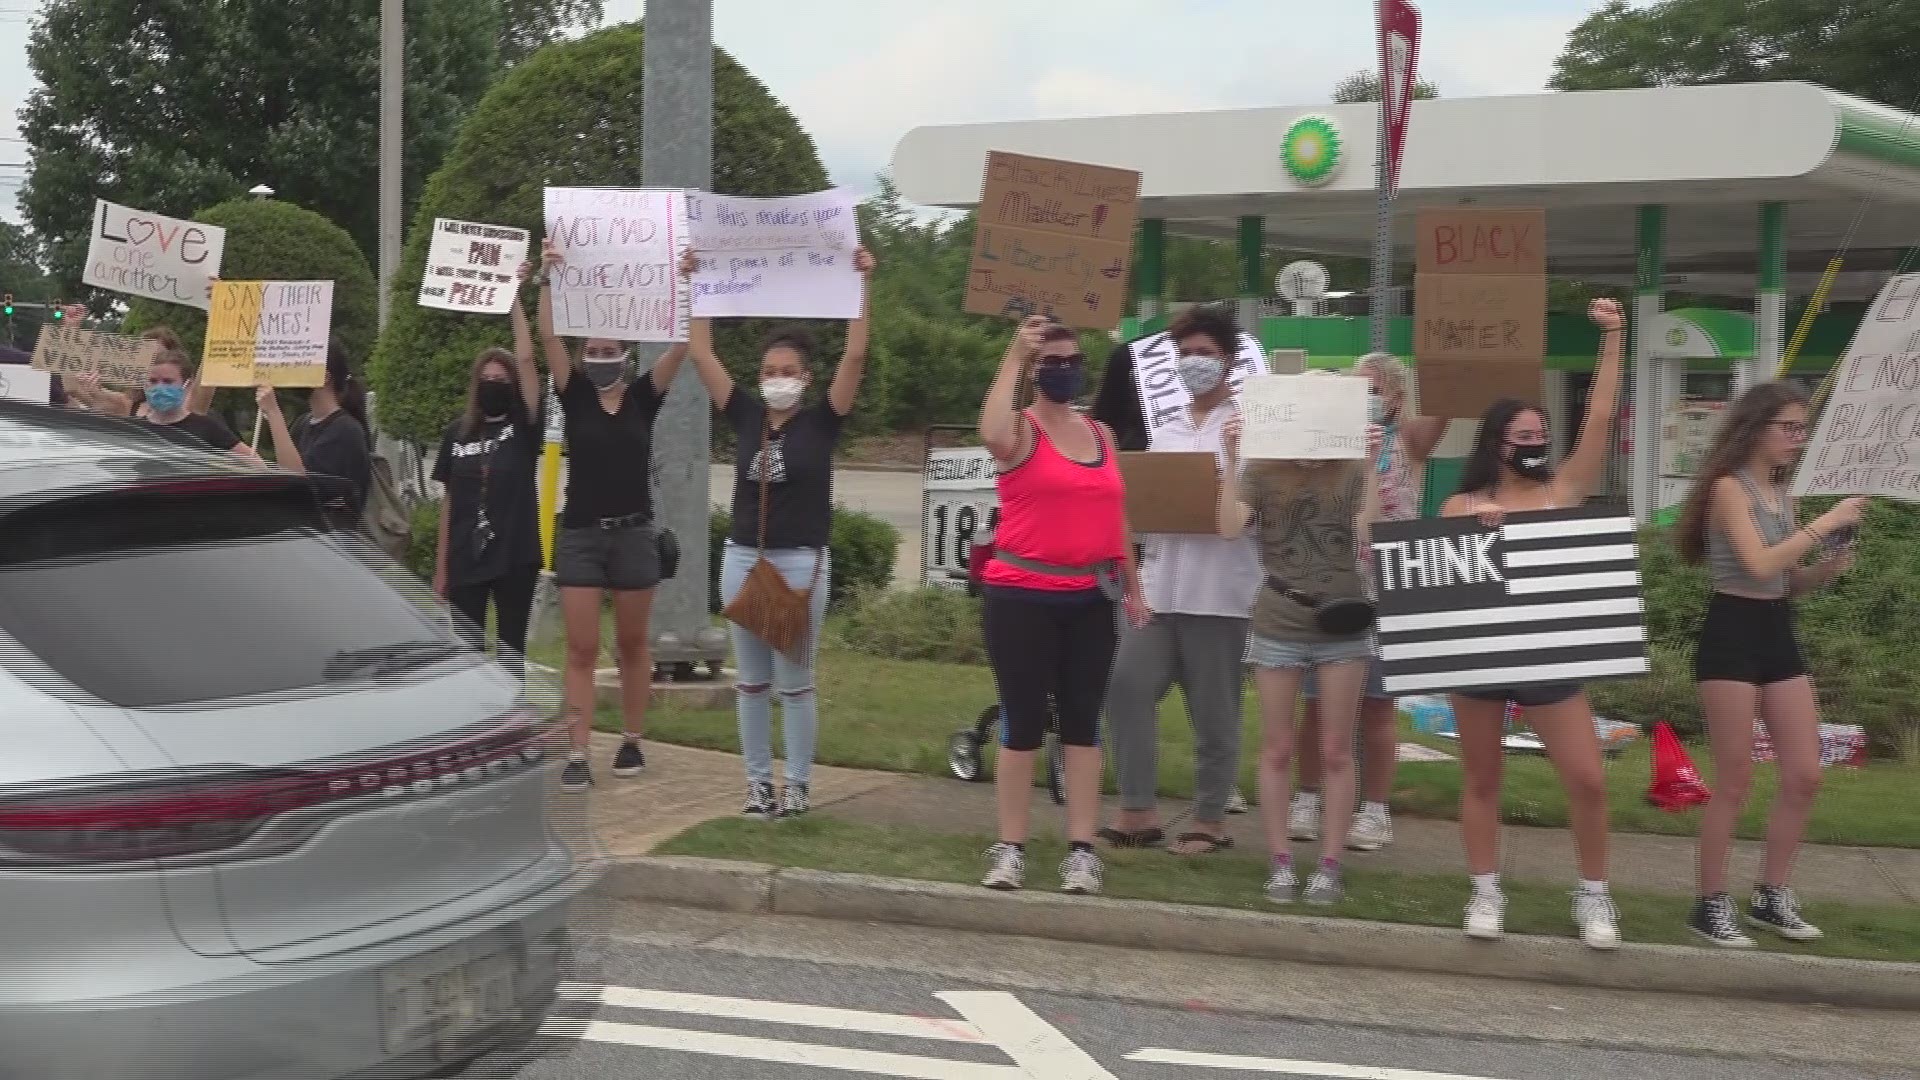 Dozens of teens came together for a peaceful protest Monday afternoon in Marietta.